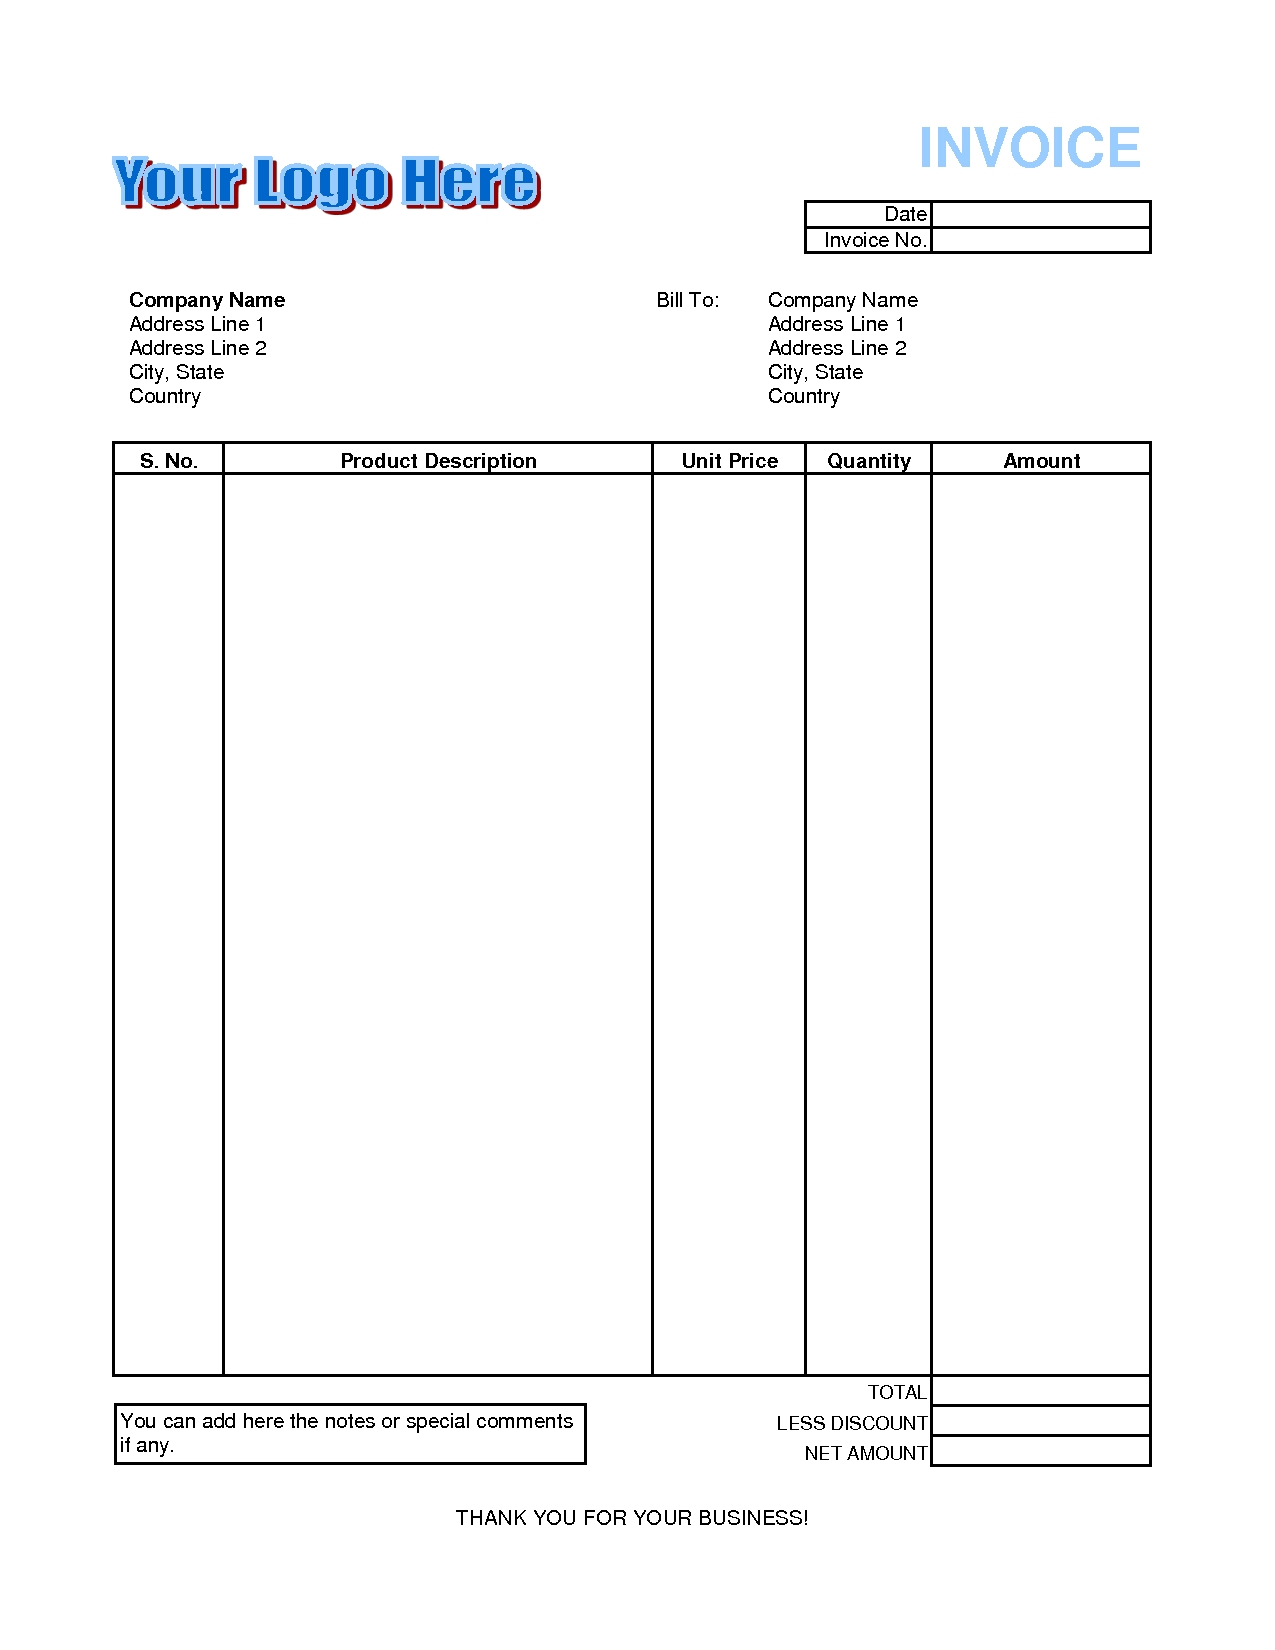 invoice format free invoice format free